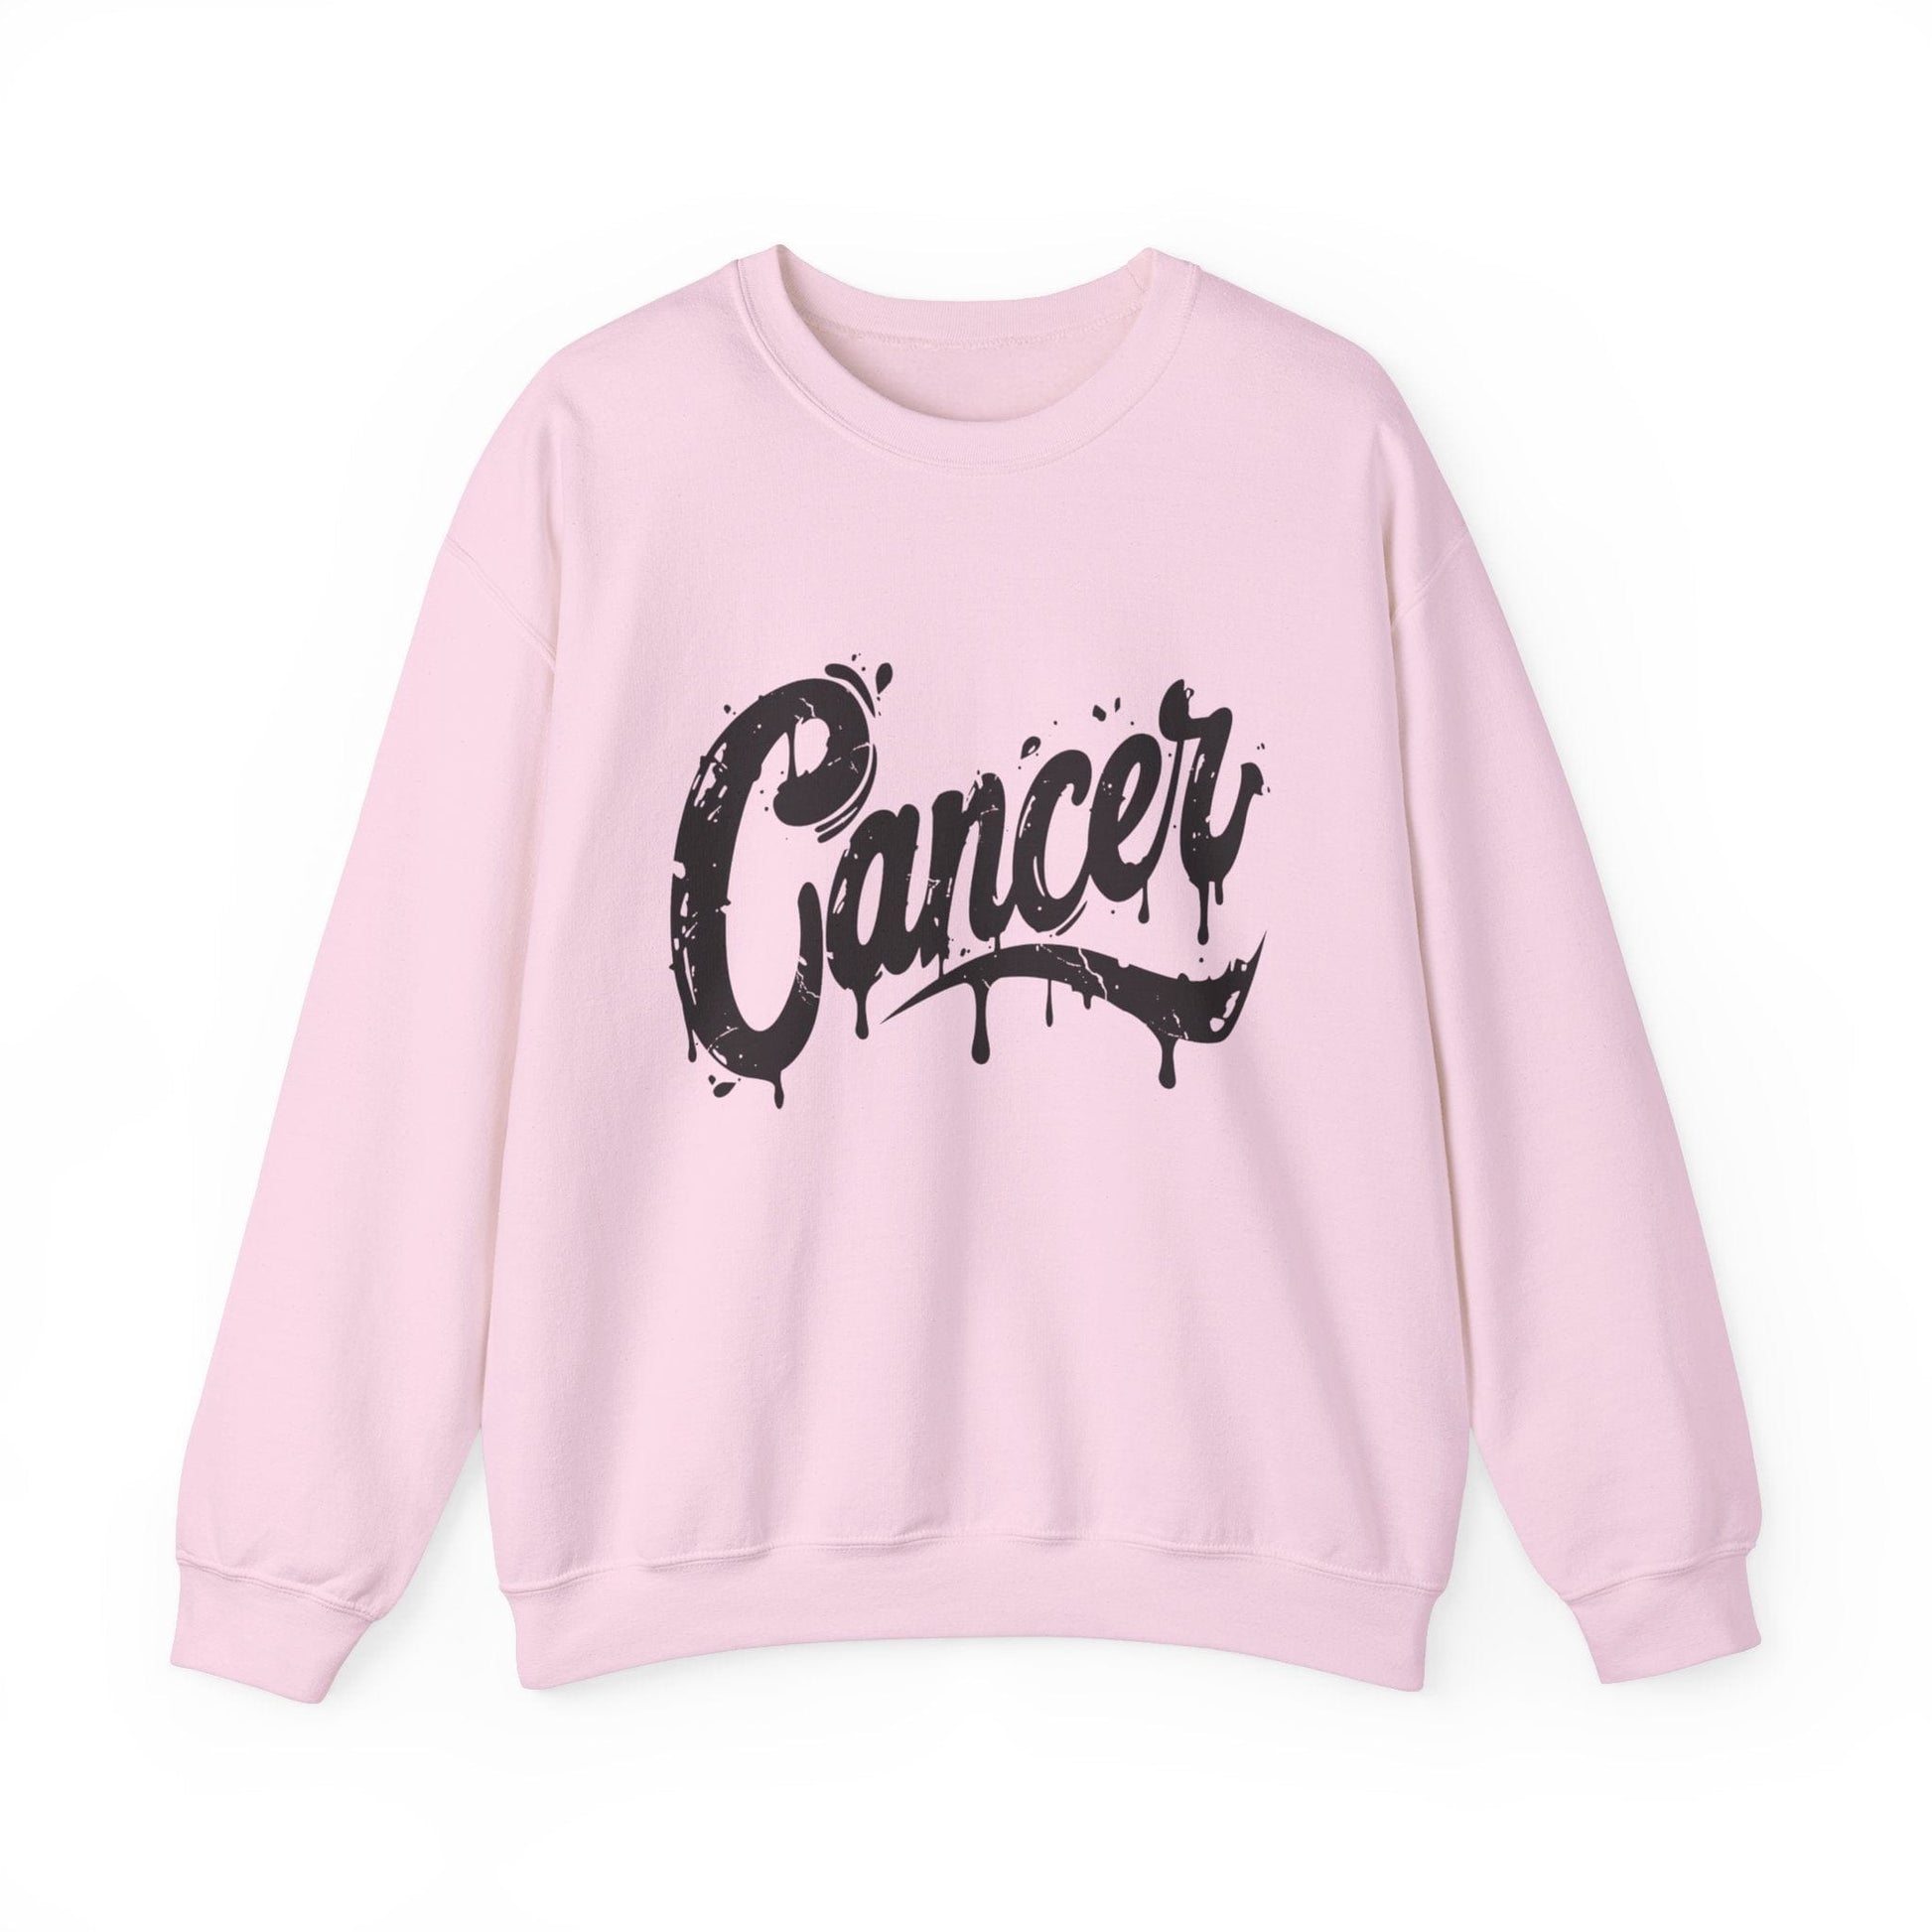 Sweatshirt S / Light Pink Tidal Emotion Cancer Sweater: Comfort in the Currents